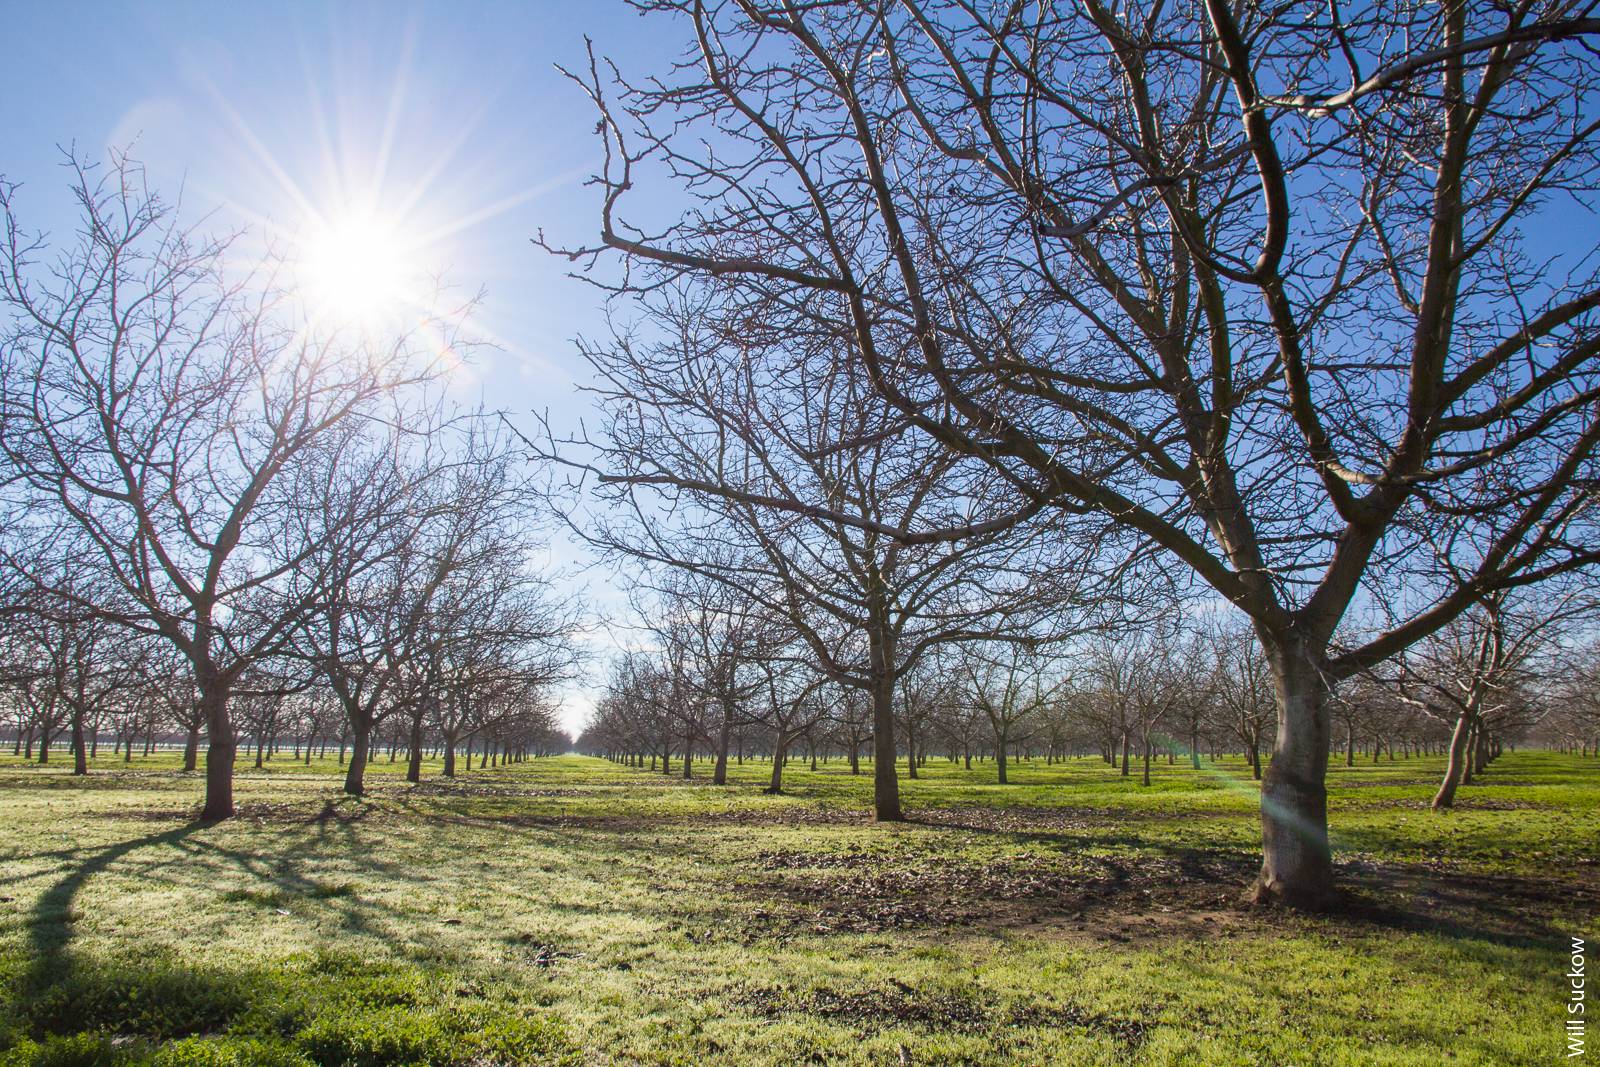 A walnut orchard near Winters. If the current trend of warmer winters continues in Yolo County, chill hours may be insufficient for many walnut varieties by the year 2100.